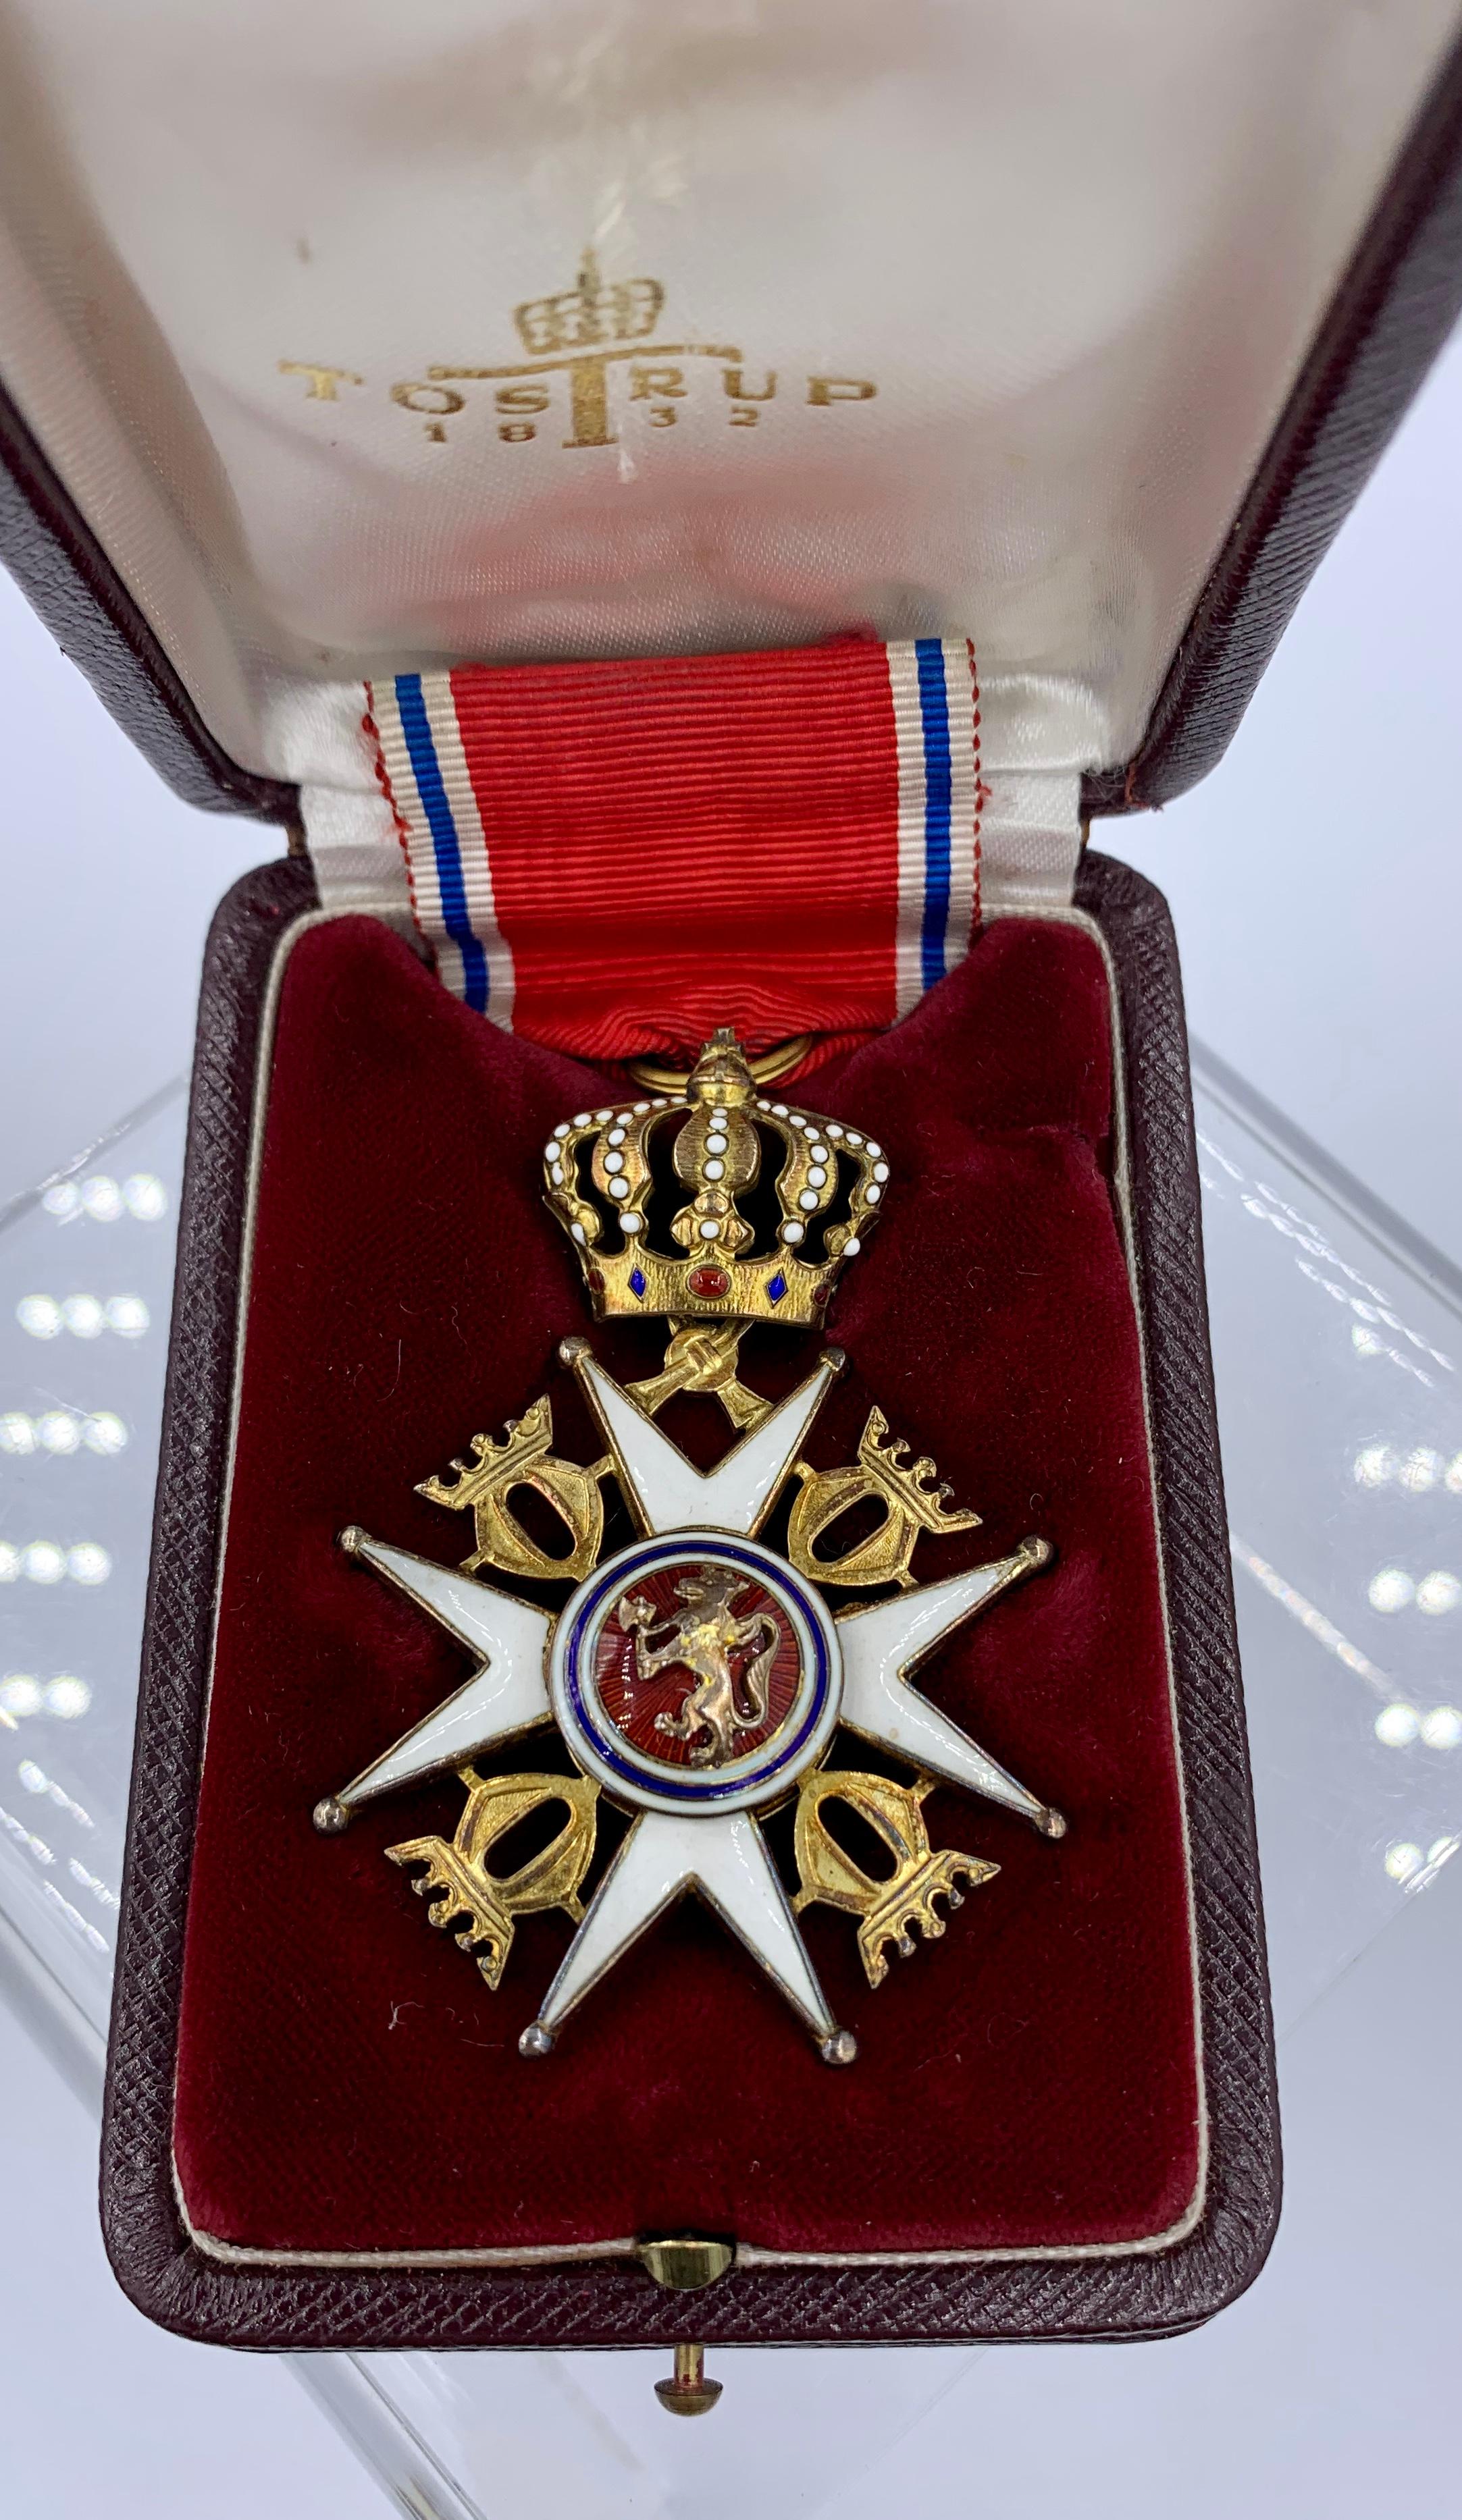 This is the exceedingly rare Royal Norwegian Order of Saint Olav presented to actress and Oscar Winner Celeste Holm.  The medal is housed in the original case which is signed on the bottom by Celeste Holm.  The medal is virtually never available for